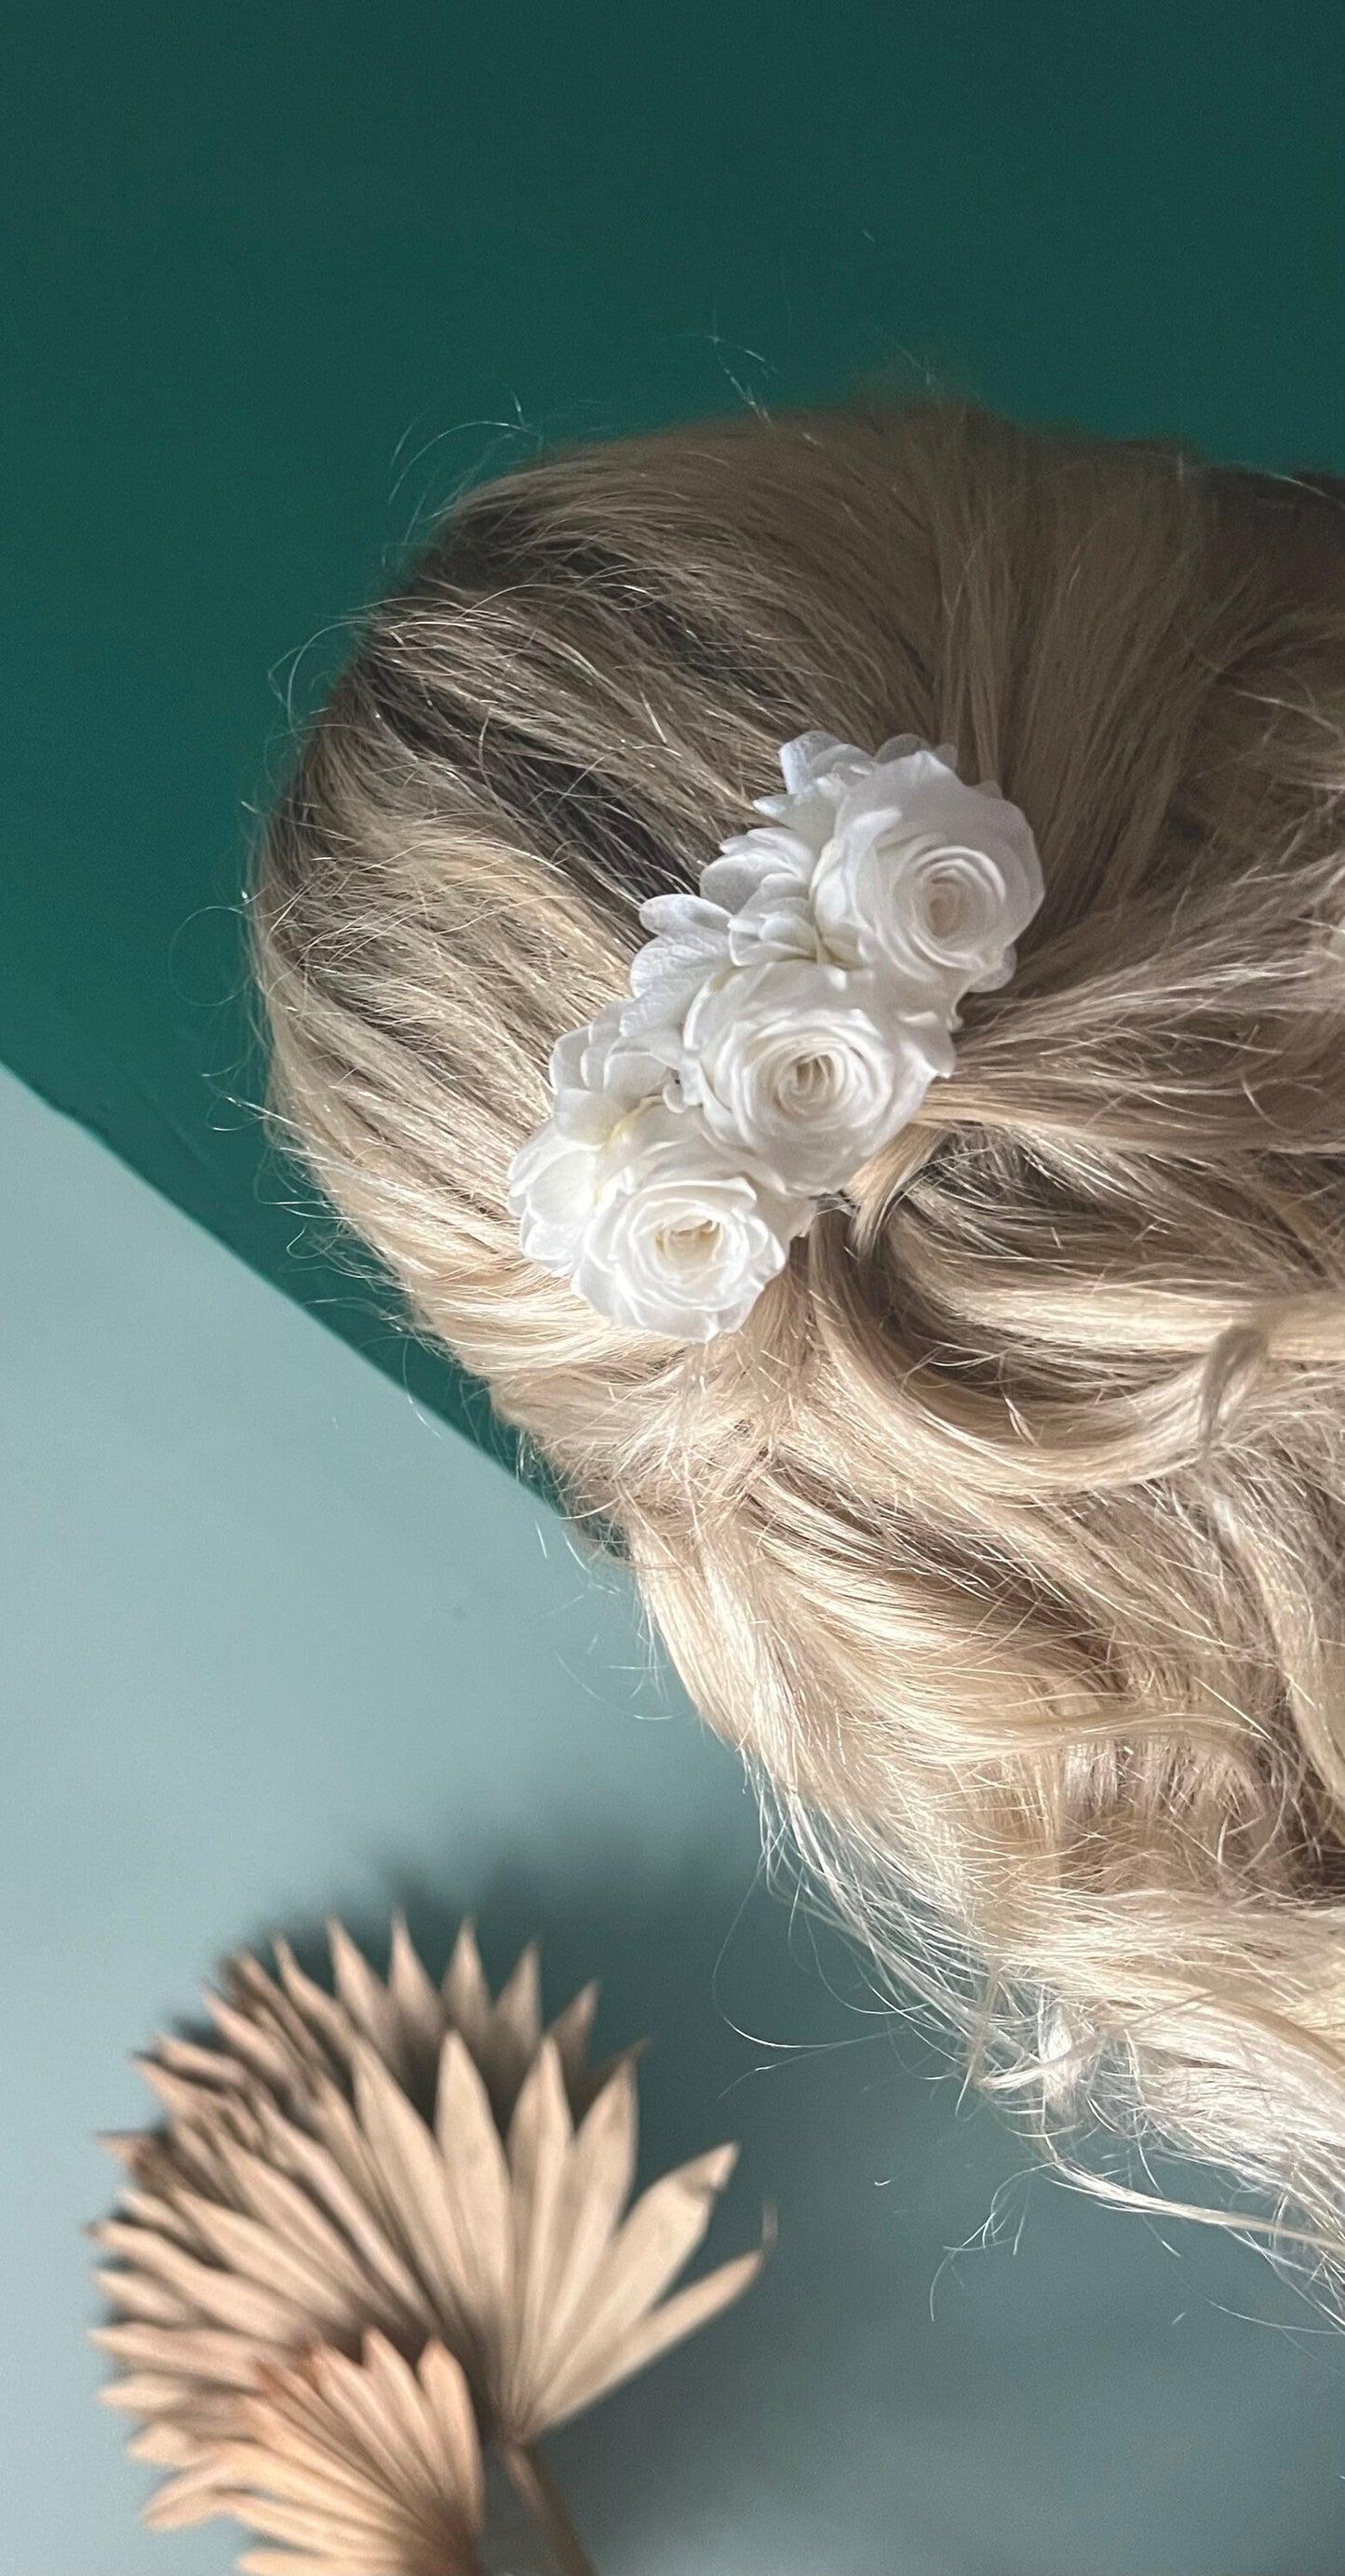 White Rose Hair Comb Small, Minimal Bridal Hair Piece, Preserved Rose Decorative Wedding Side Comb in Gold, Everlasting Flower Updo Hair